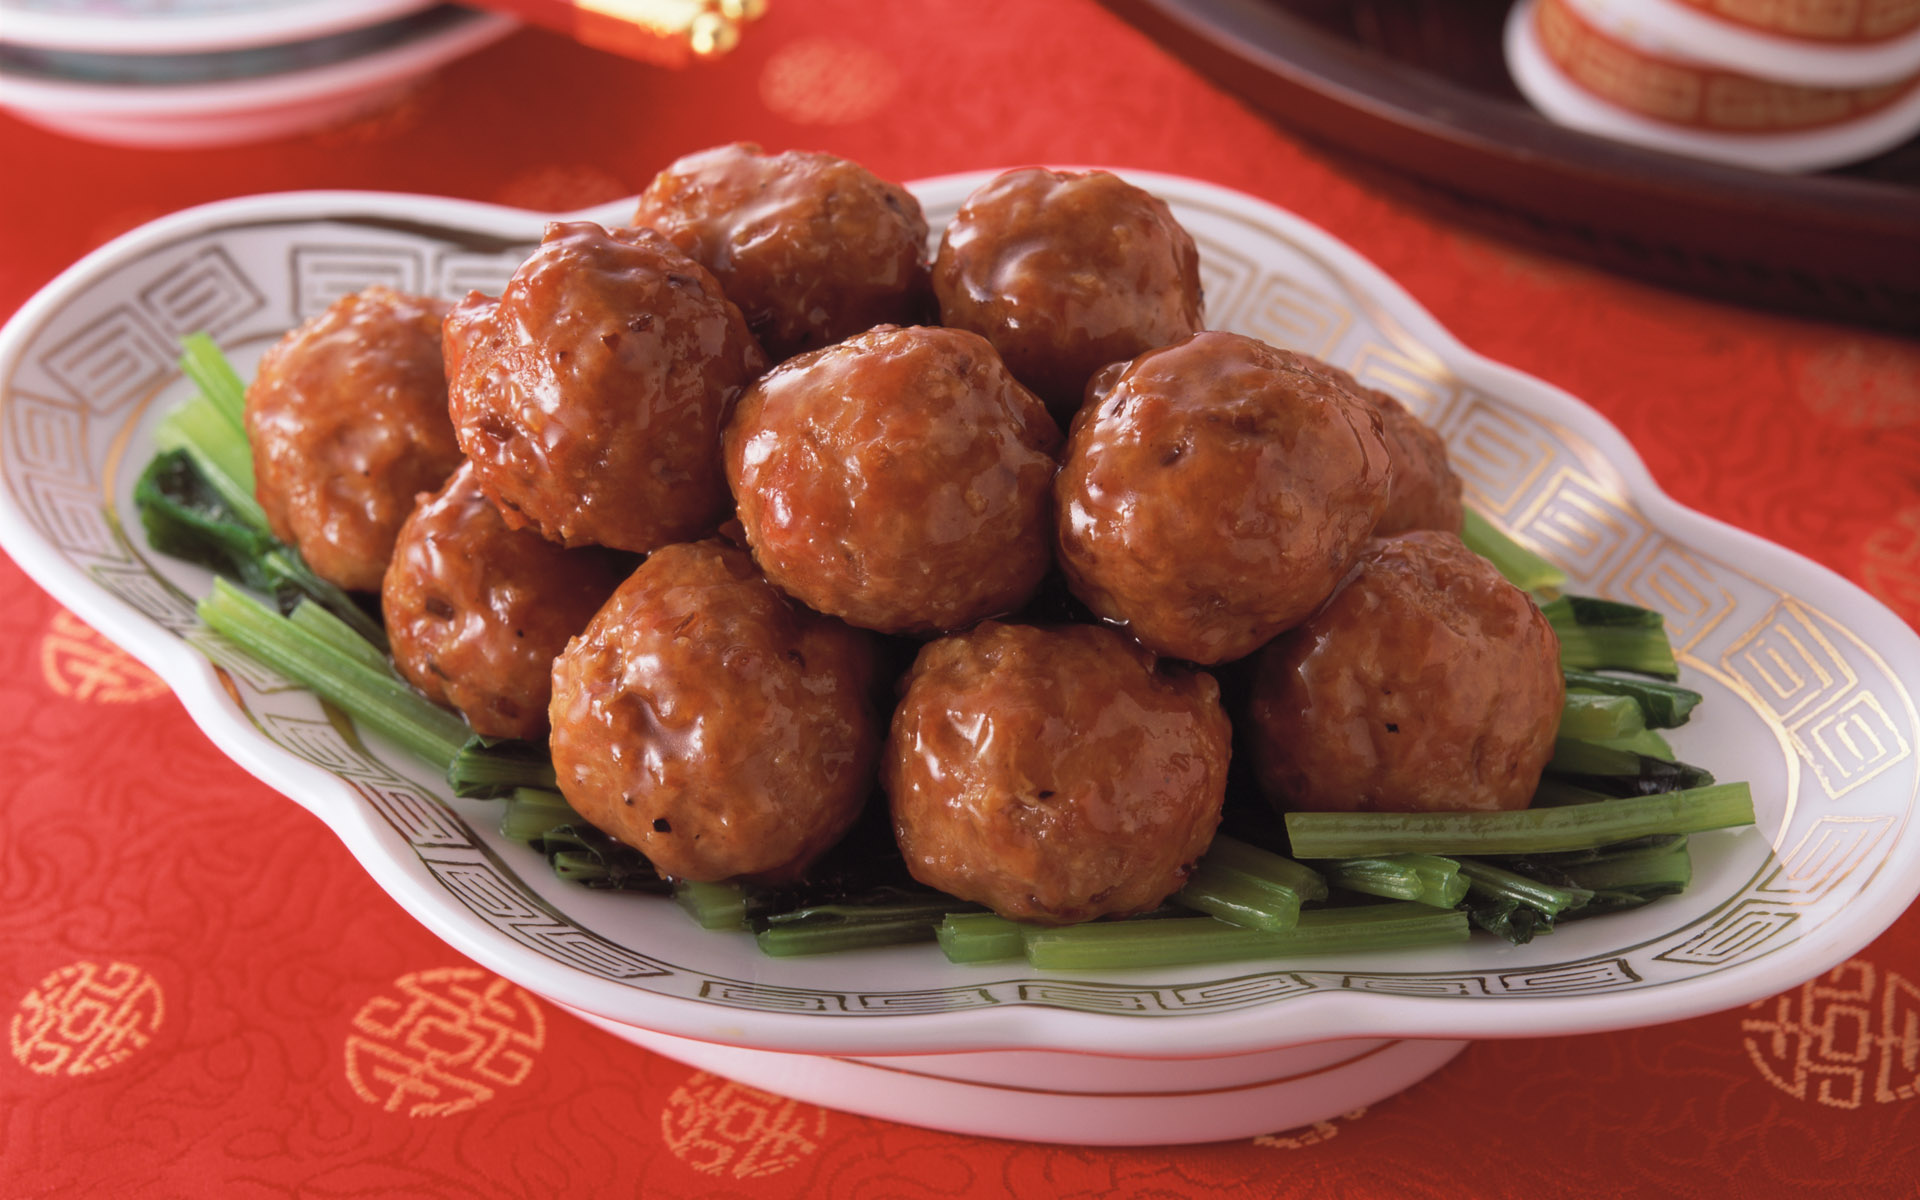 Picture Food Frikadeller Meat products rissole meatballs